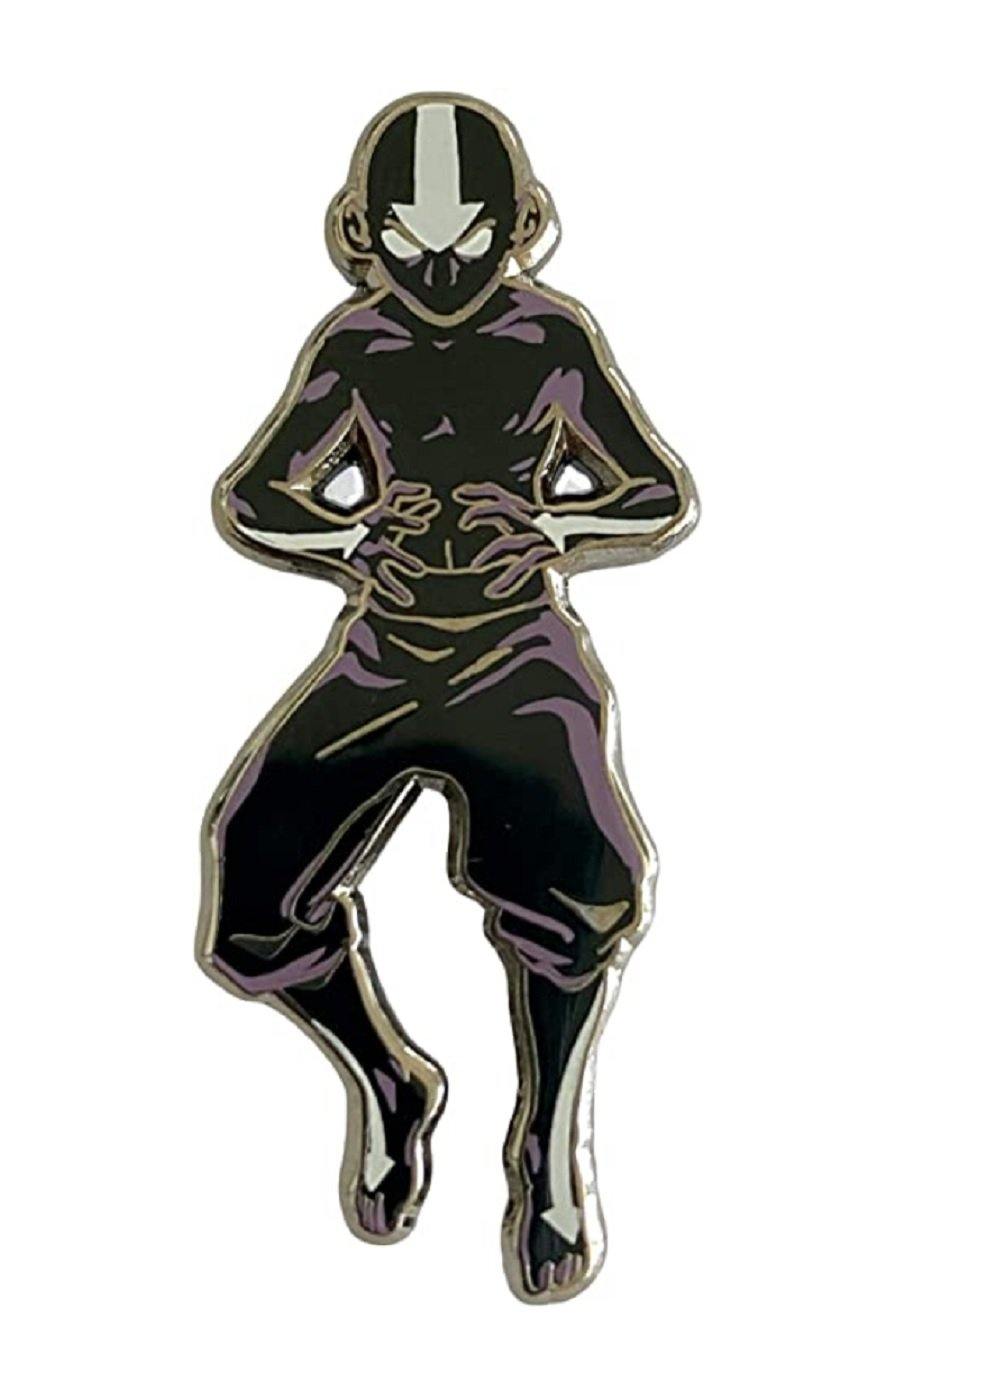 Avatar The Last Airbender- Astral Aang Full Body Collectible Enamel Pin